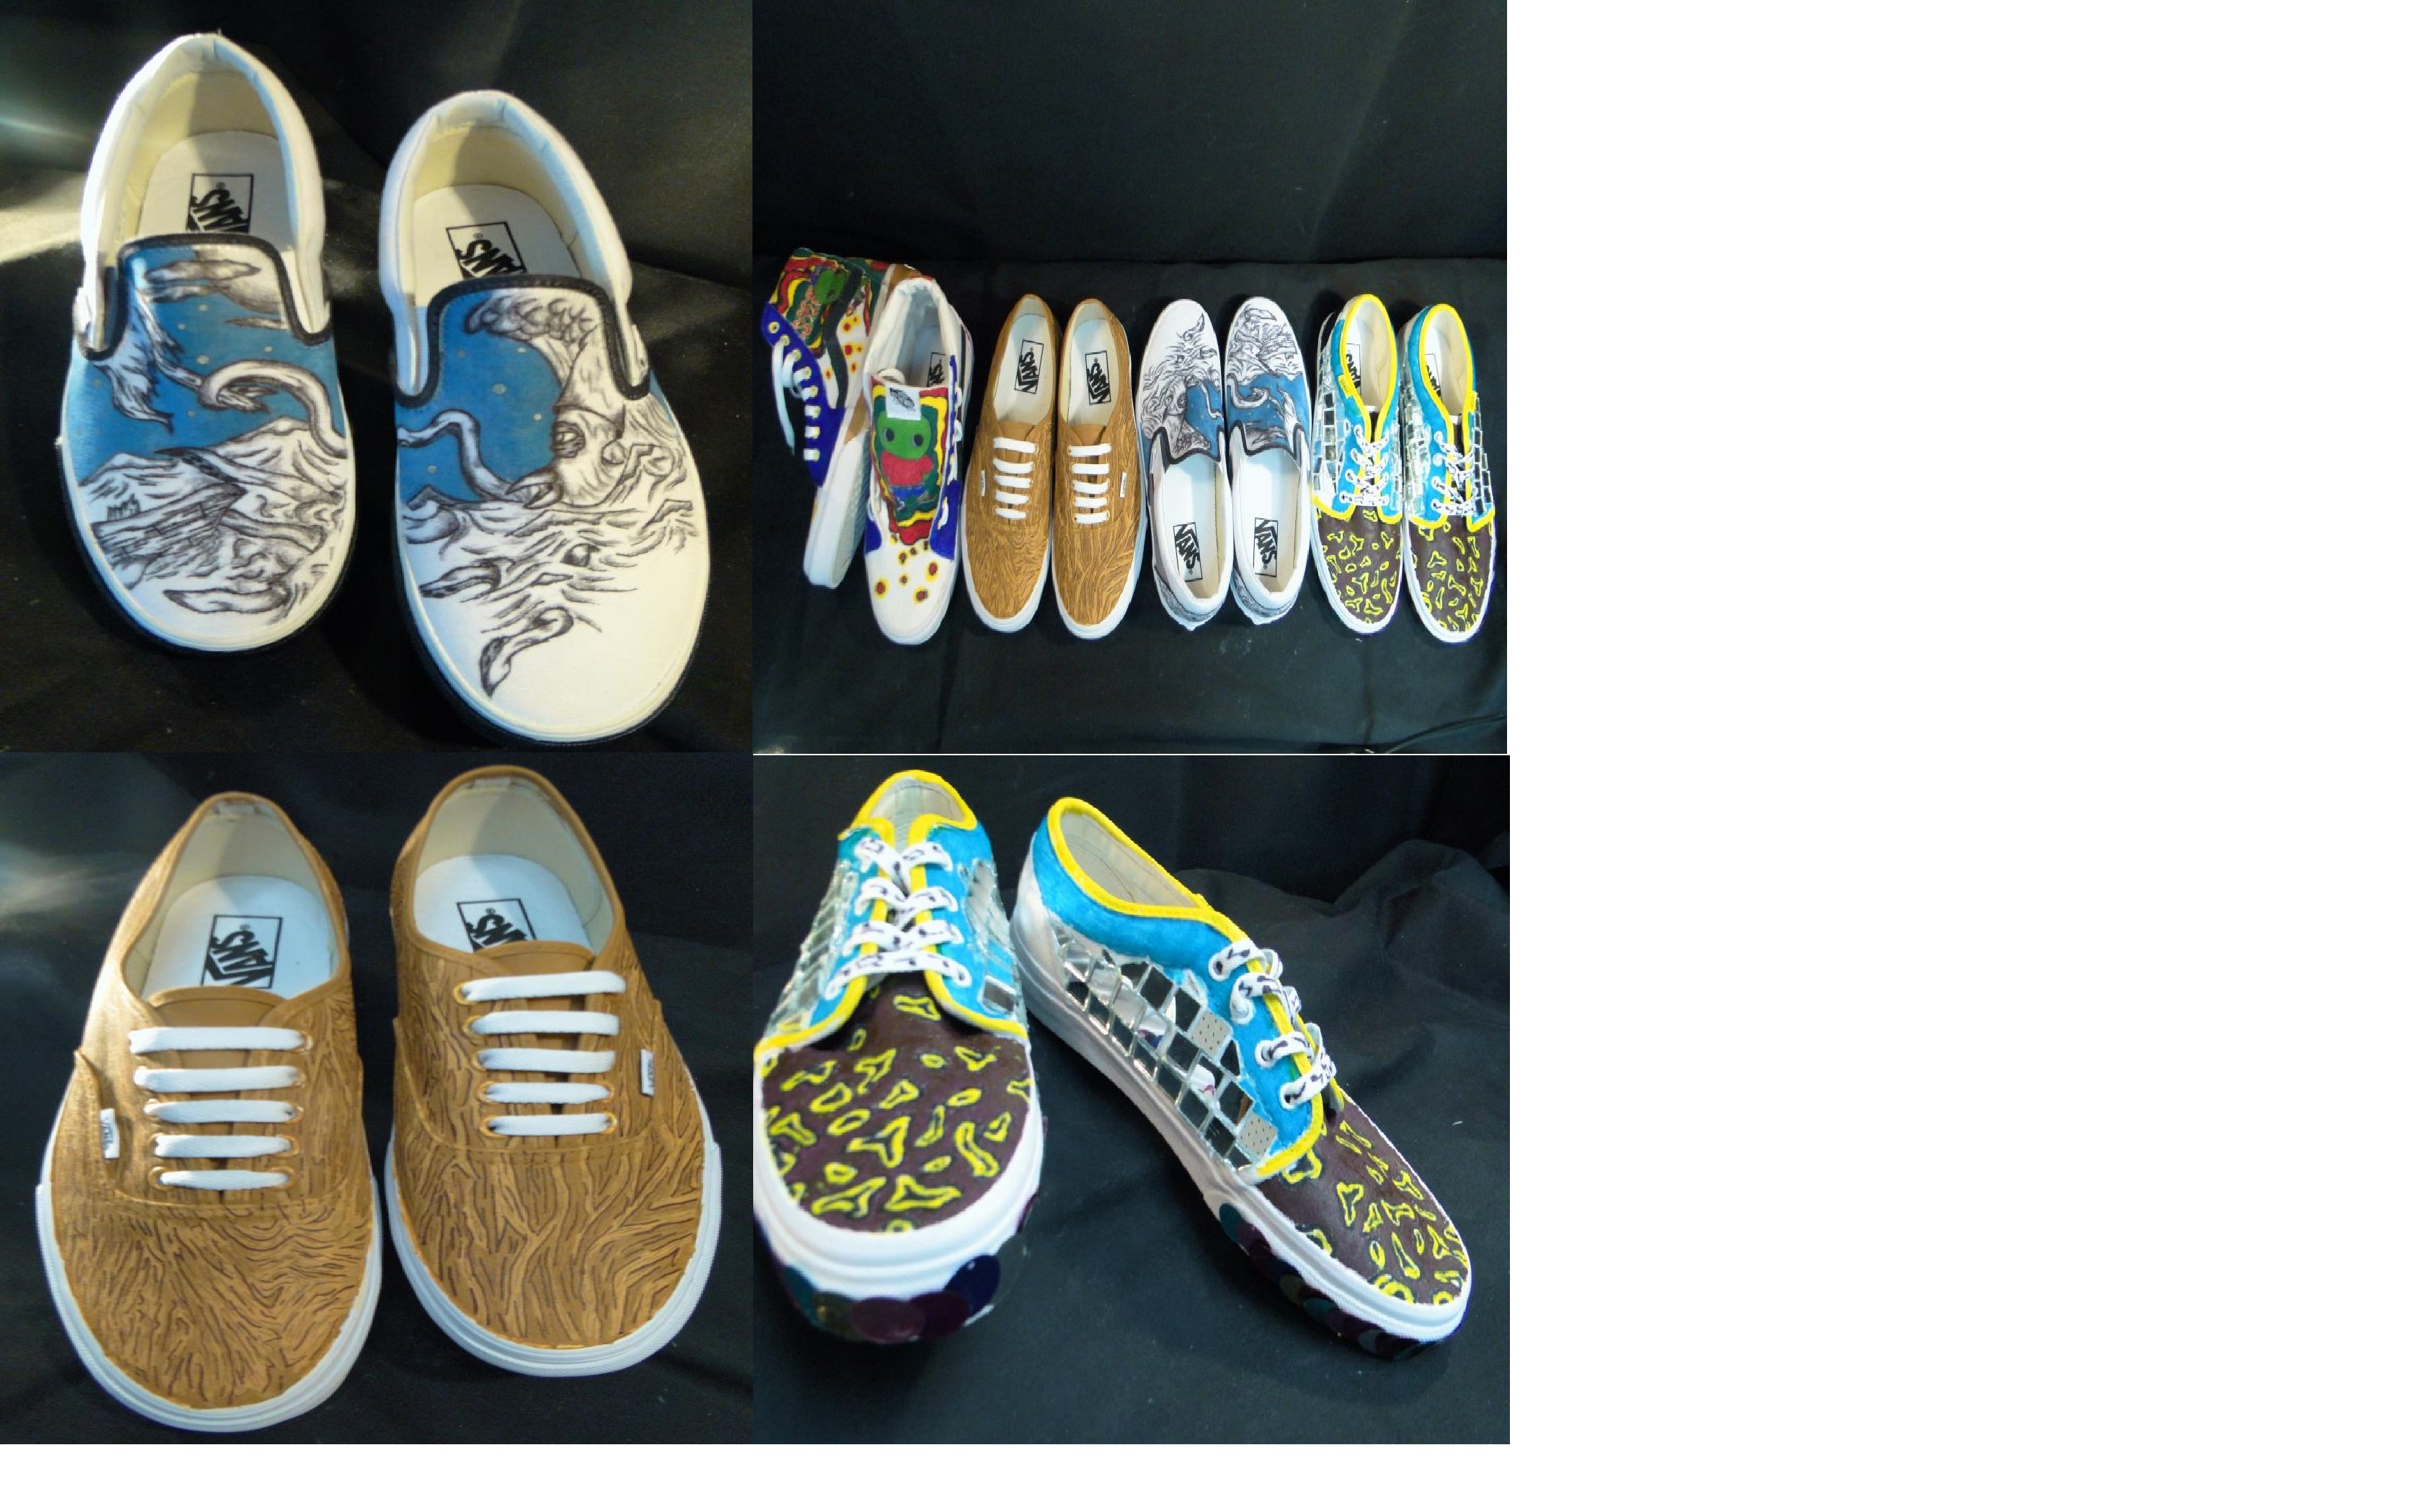 vans competition winners